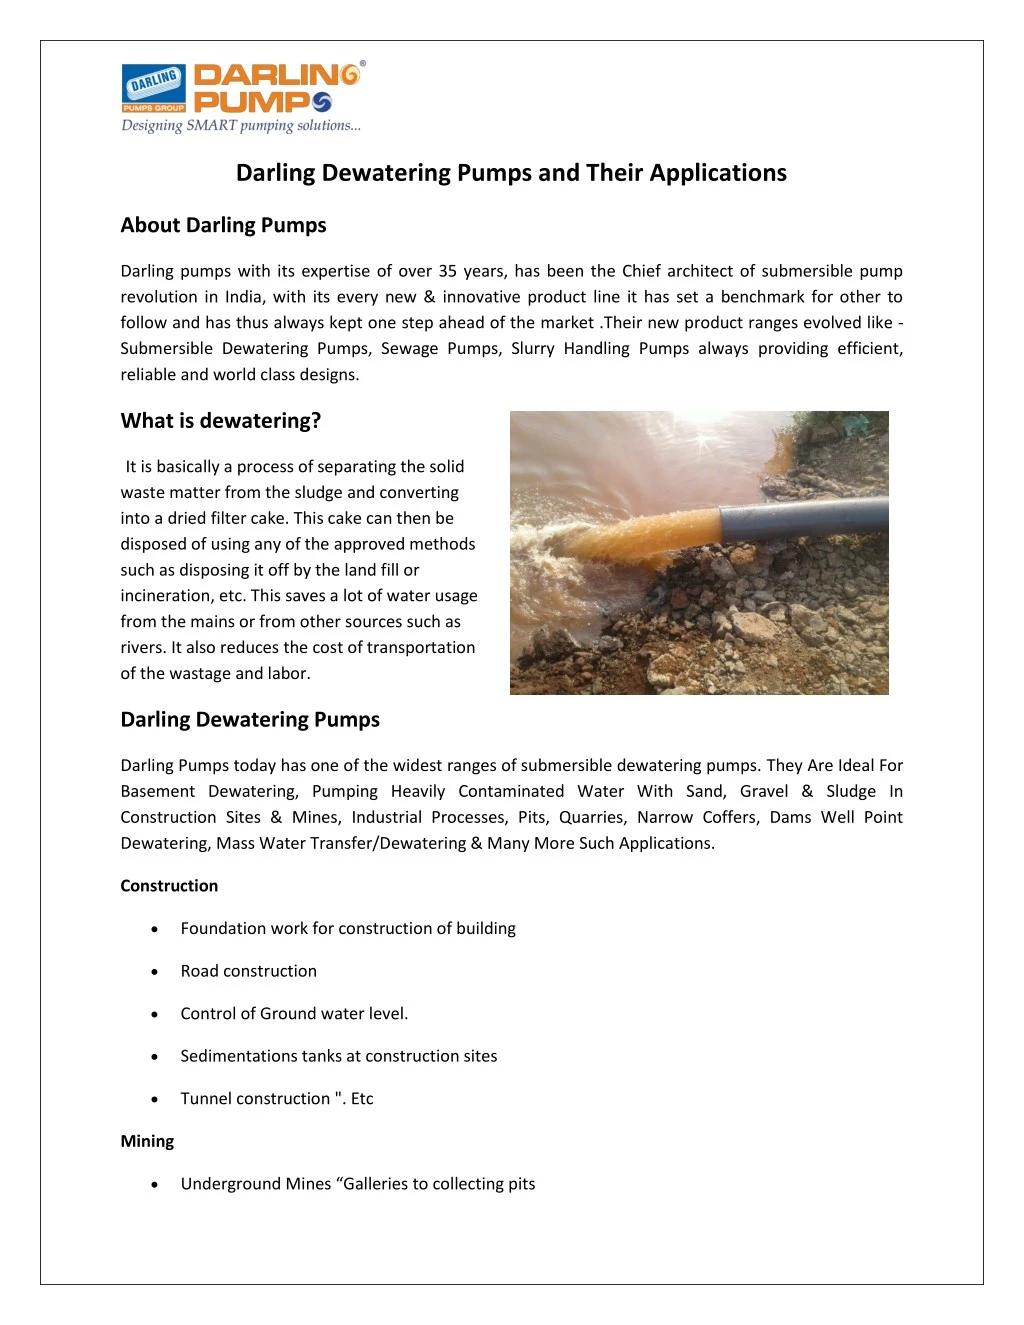 darling dewatering pumps and their applications